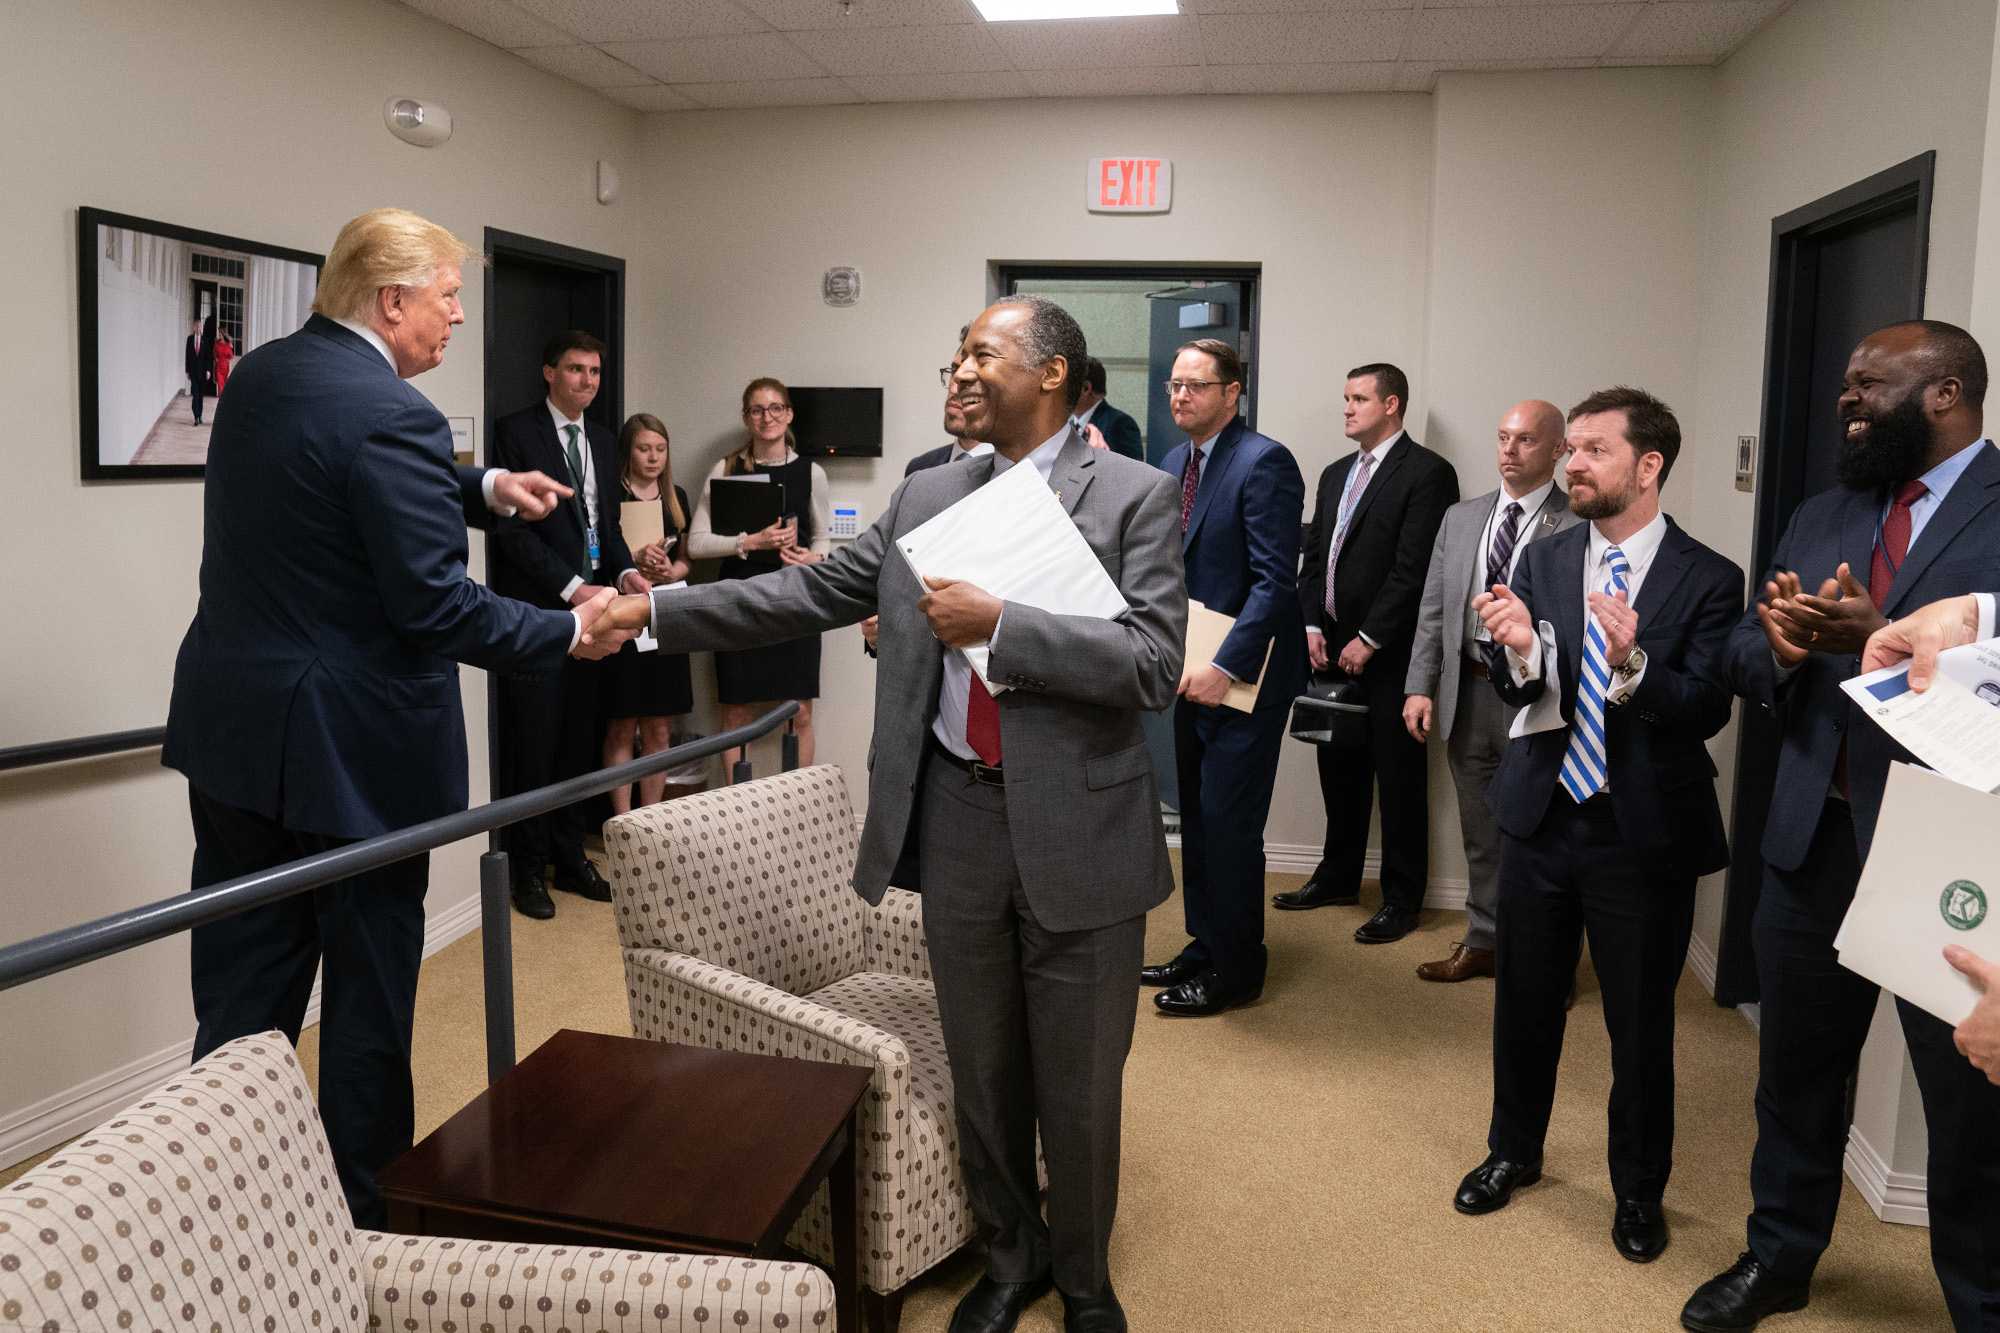 President Trump and Secretary Carson at an Opportunity Zones event